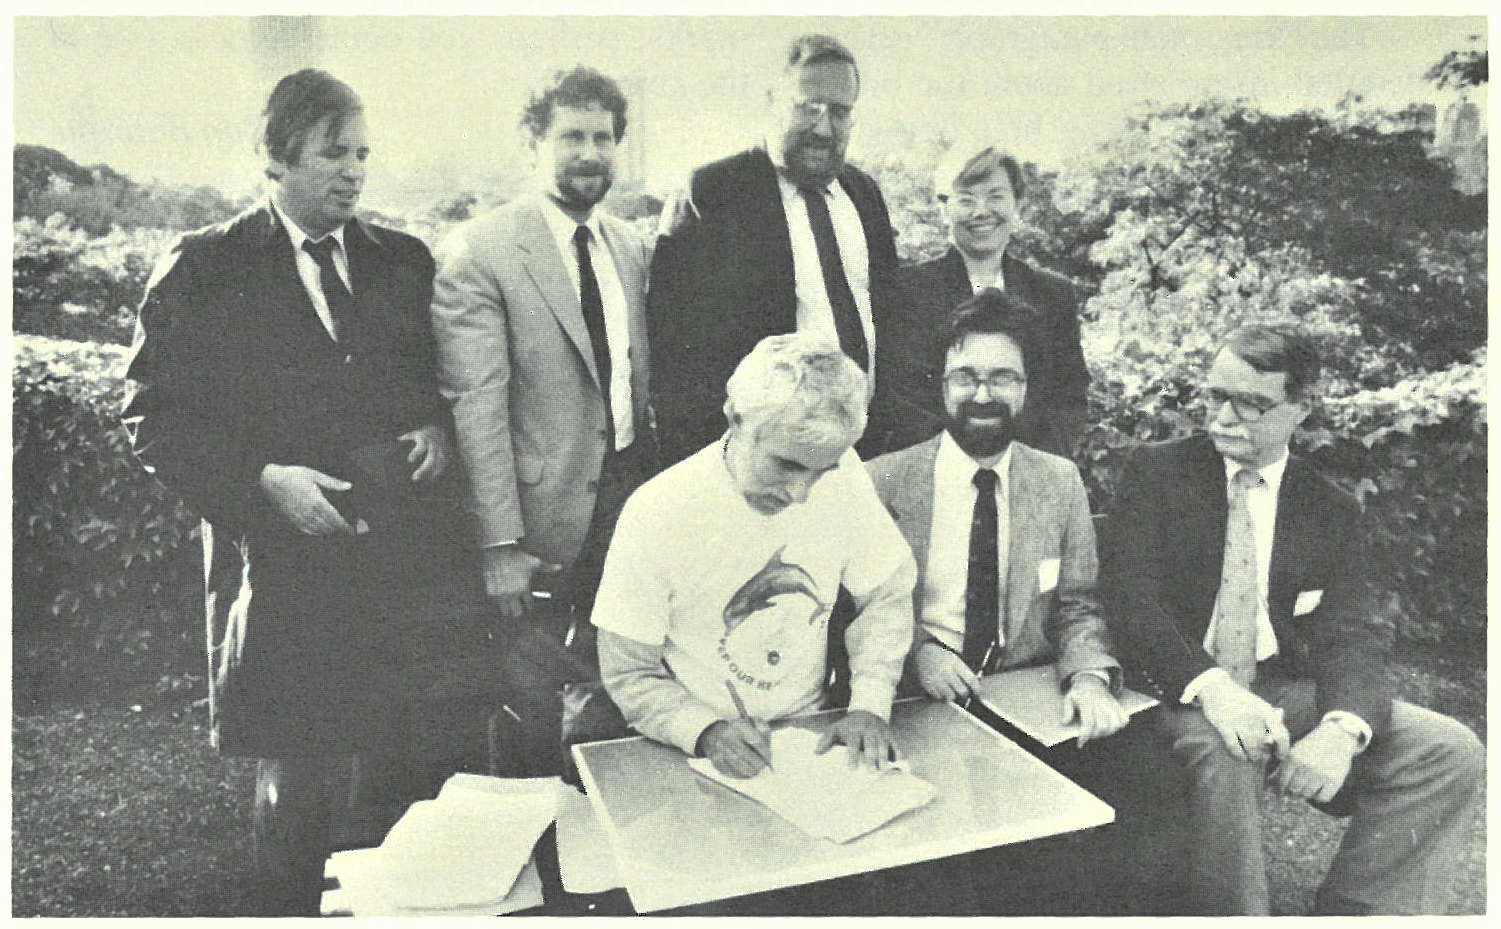 NYC Parks Commissioner Henry Stern signing over management of Dubos Point Sanctuary to NYC Audubon. Also seated (left to right): past Board Member Drew Lehman and past Board President and Secretary Geoffrey Cobb Ryan. Standing (left to right): Bernard Blum of Friends of Rockaway, Marc Matsil of NYC Parks, past Board President and Vice President Albert F. Appleton, and NYC Parks Deputy Commissioner Diana Chapin. Photo: Calvin Wilson/NYC Parks